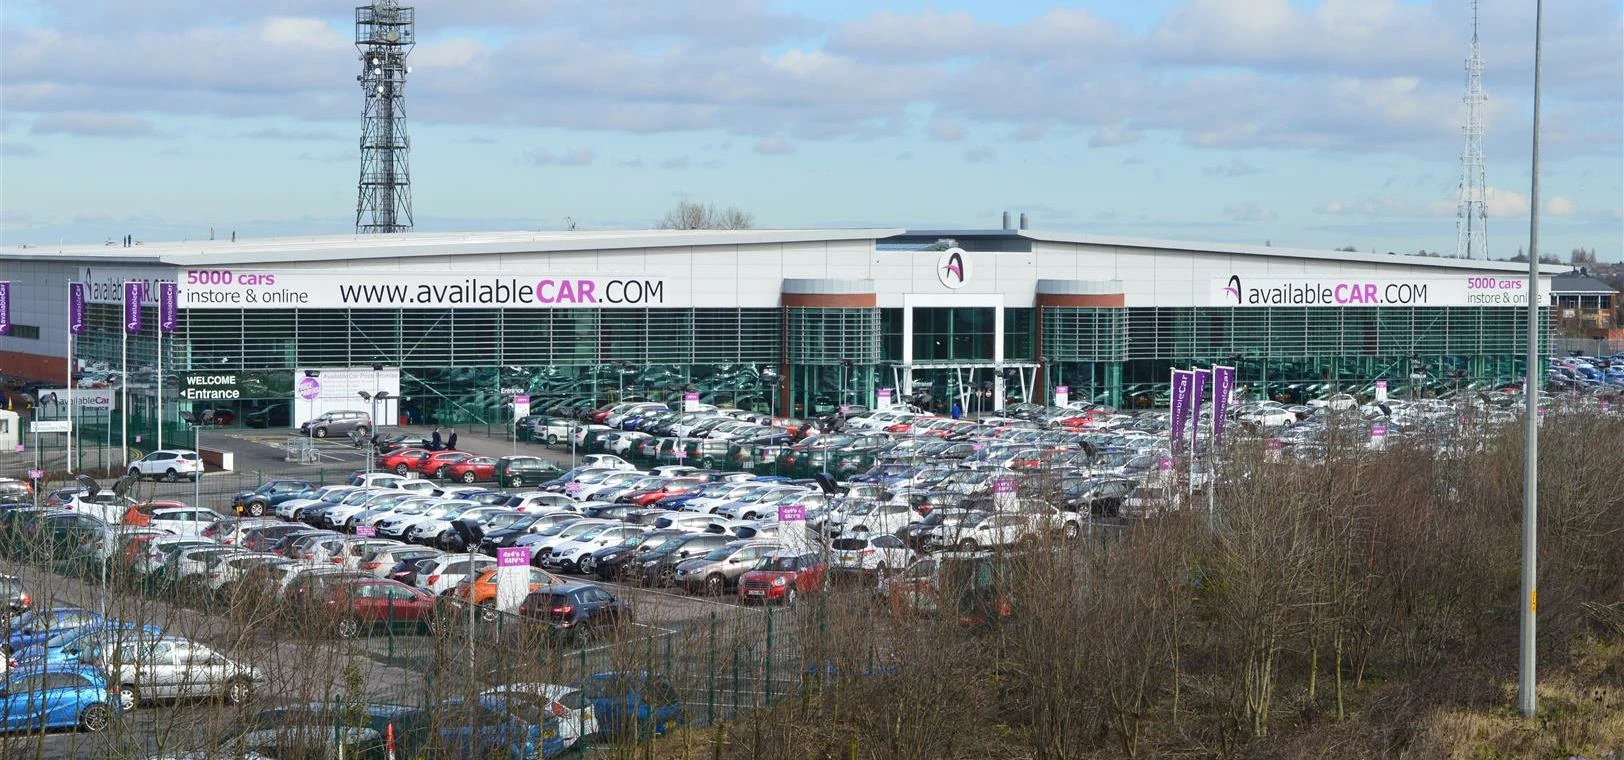 Knight Frank brokered the sale of the former Carcraft site at Capitol Park, Leeds, to Availablecar.c